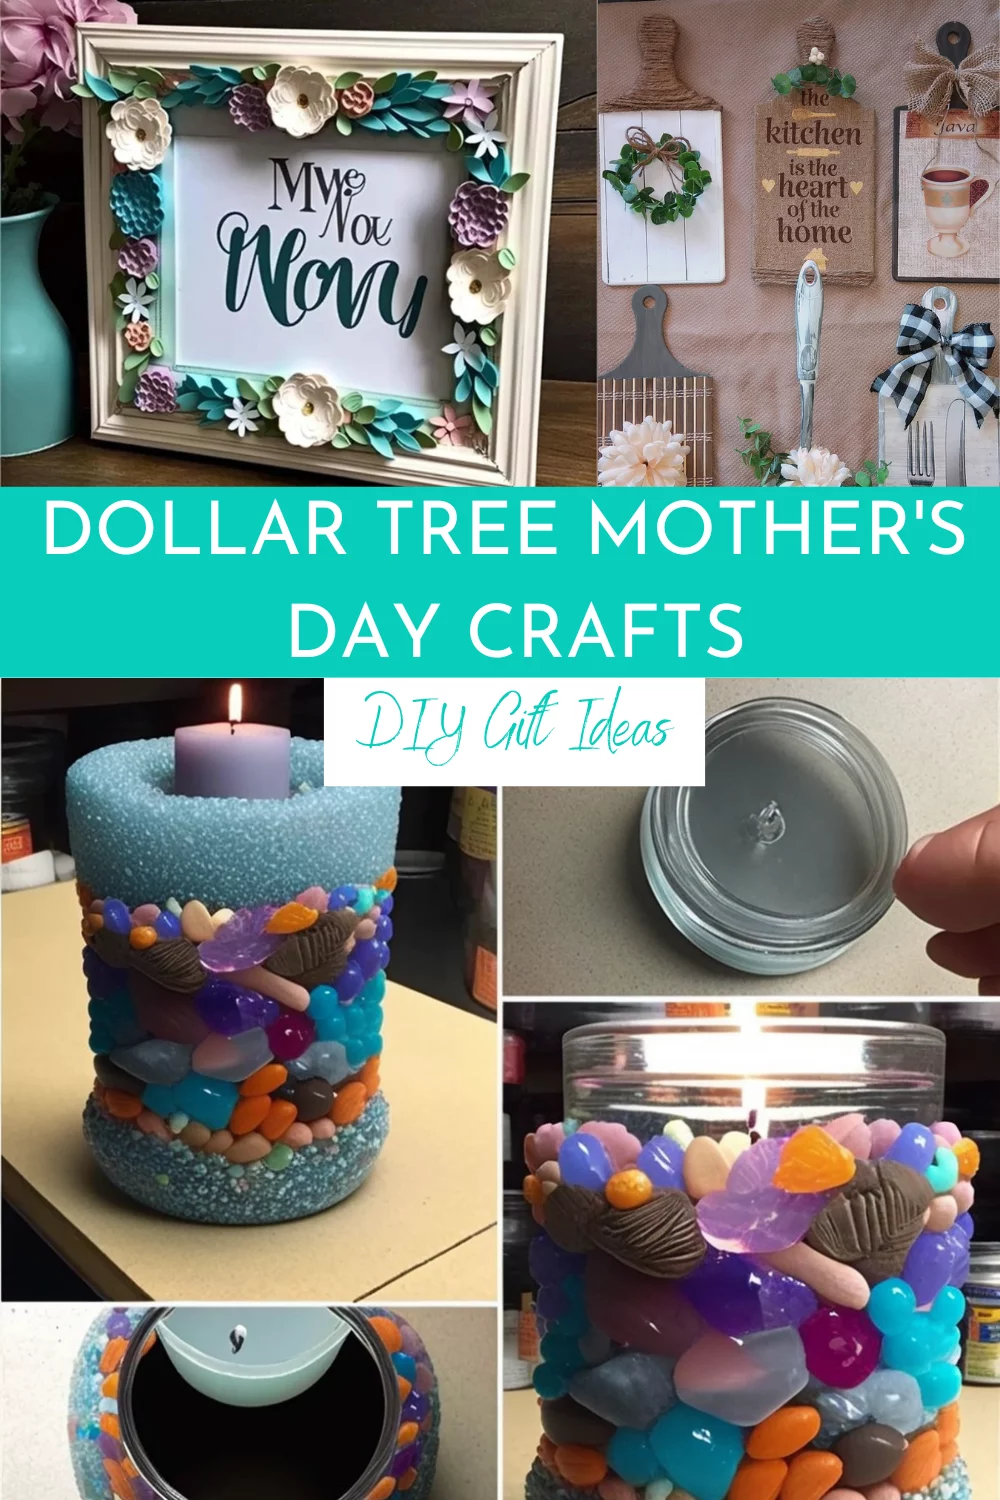 DIY MOTHER'S DAY GIFT IDEAS, 10 Dollar Tree Mother's Day Gift Ideas 2021